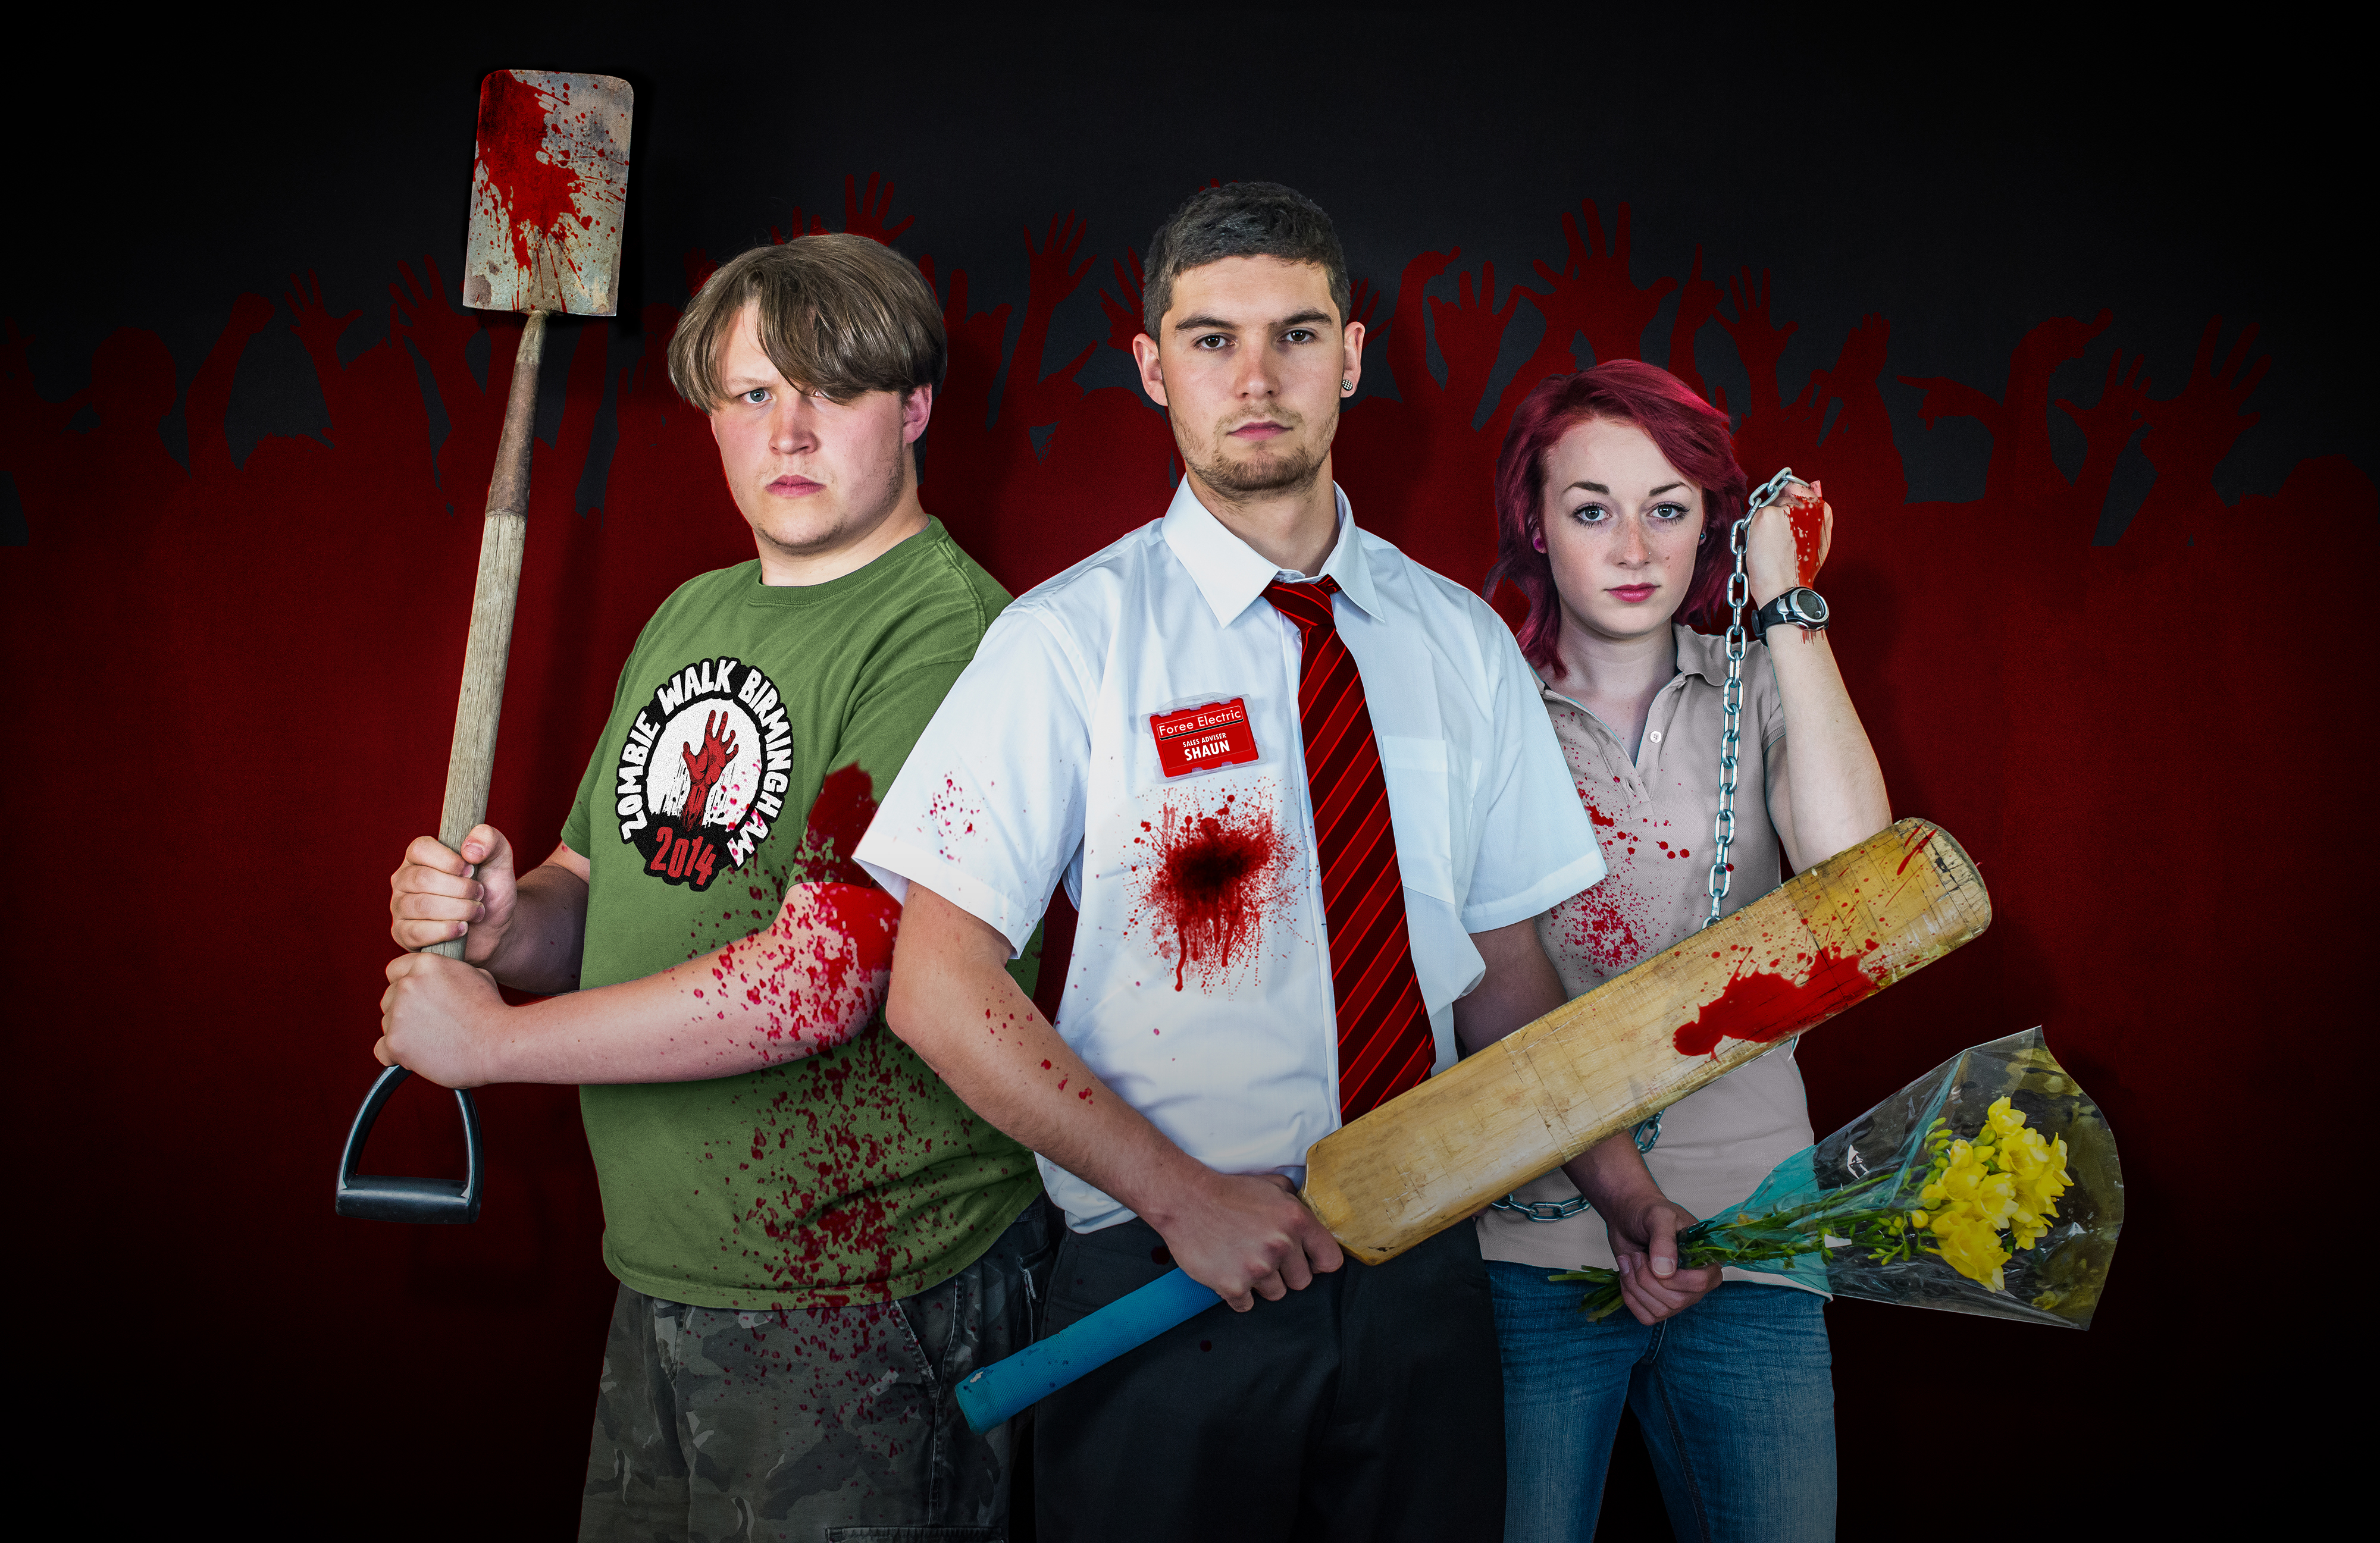 Zombie fans will be dressing up as Simon Pegg's character from film Shaun of the Dead, all for charity